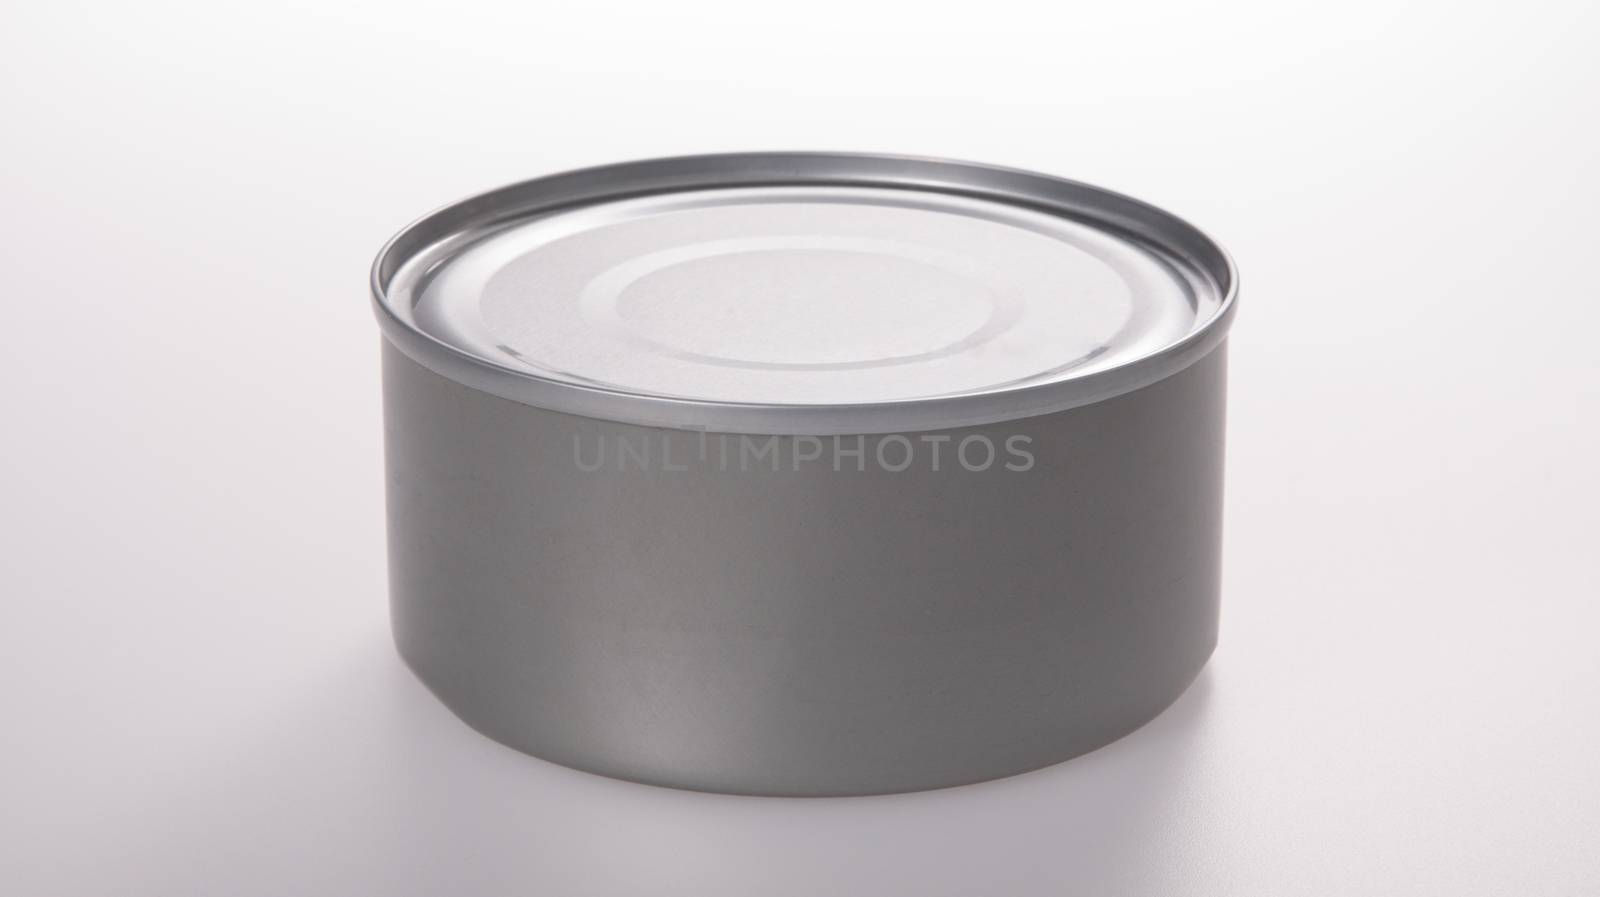 aluminum food can without label isolated on white by lanalanglois